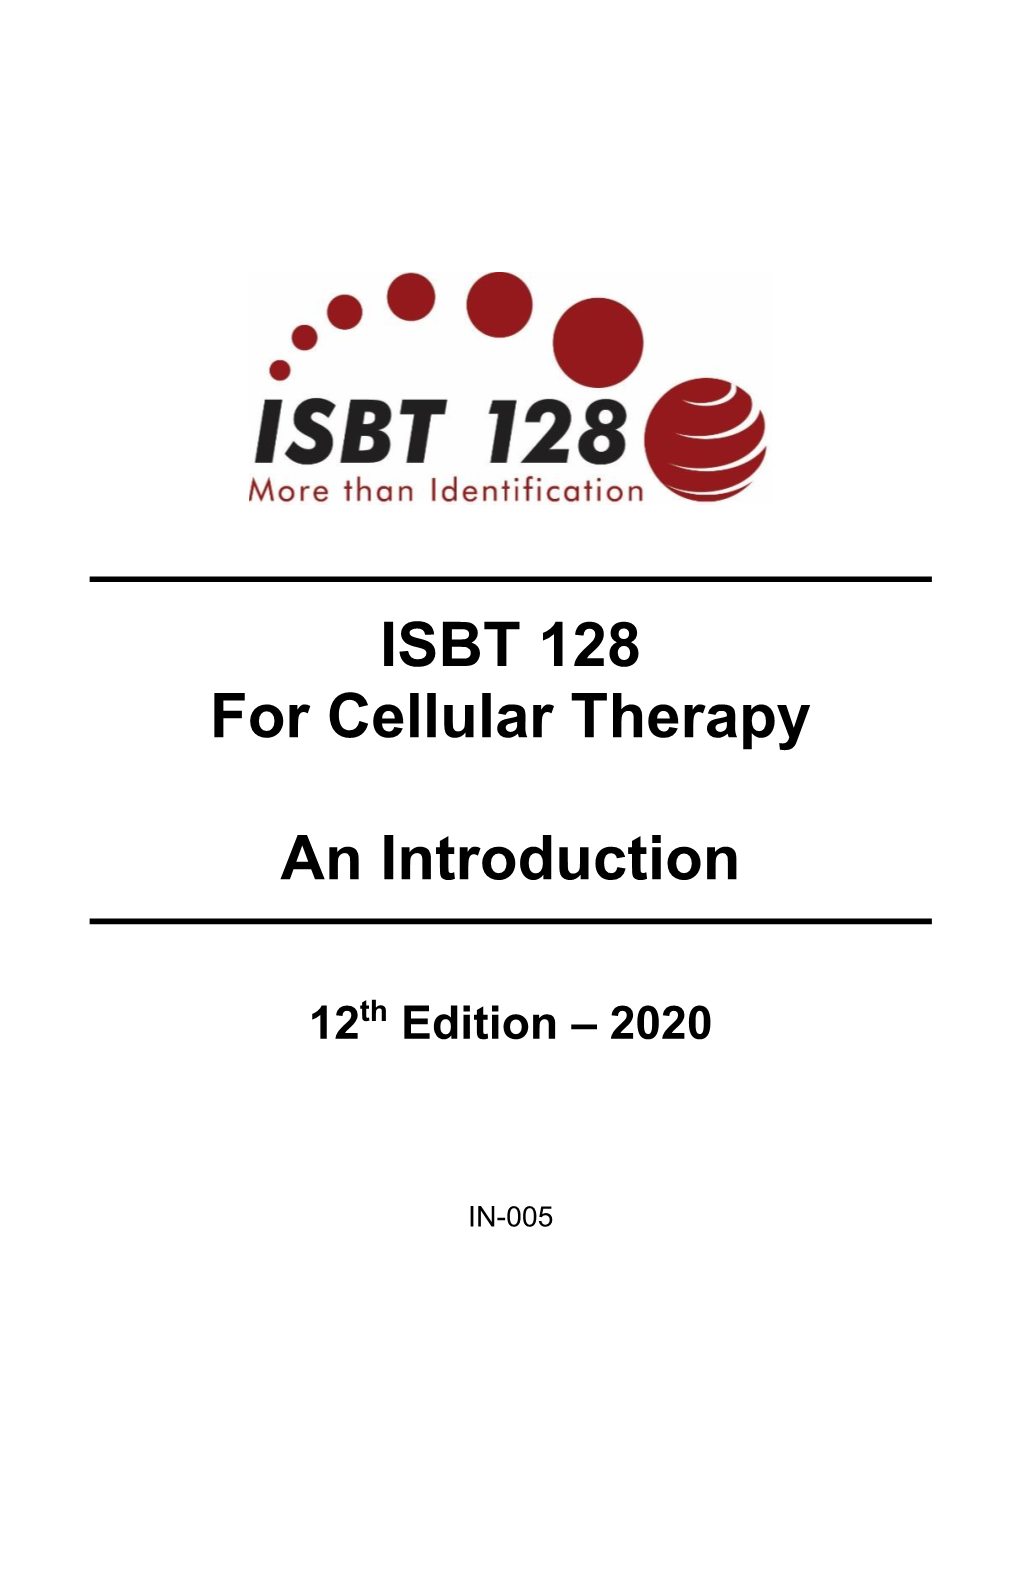 ISBT 128 for Cellular Therapy an Introduction